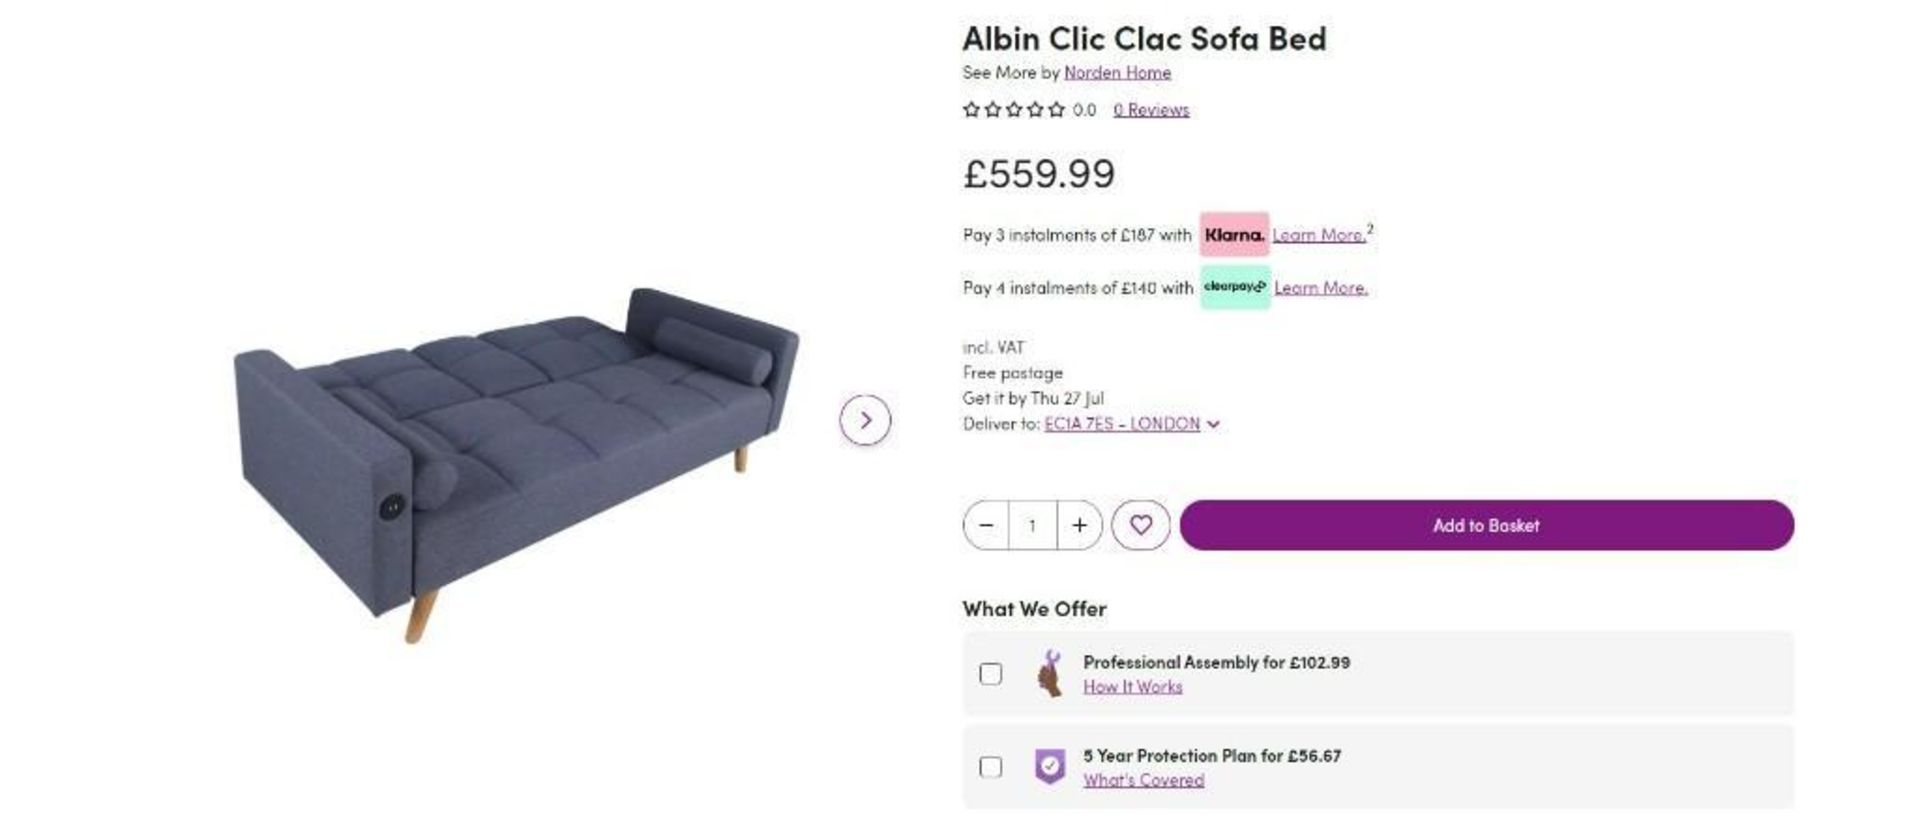 Brand new Boxed 2 Seater Clic Clac USB Sofa Bed - Image 2 of 10